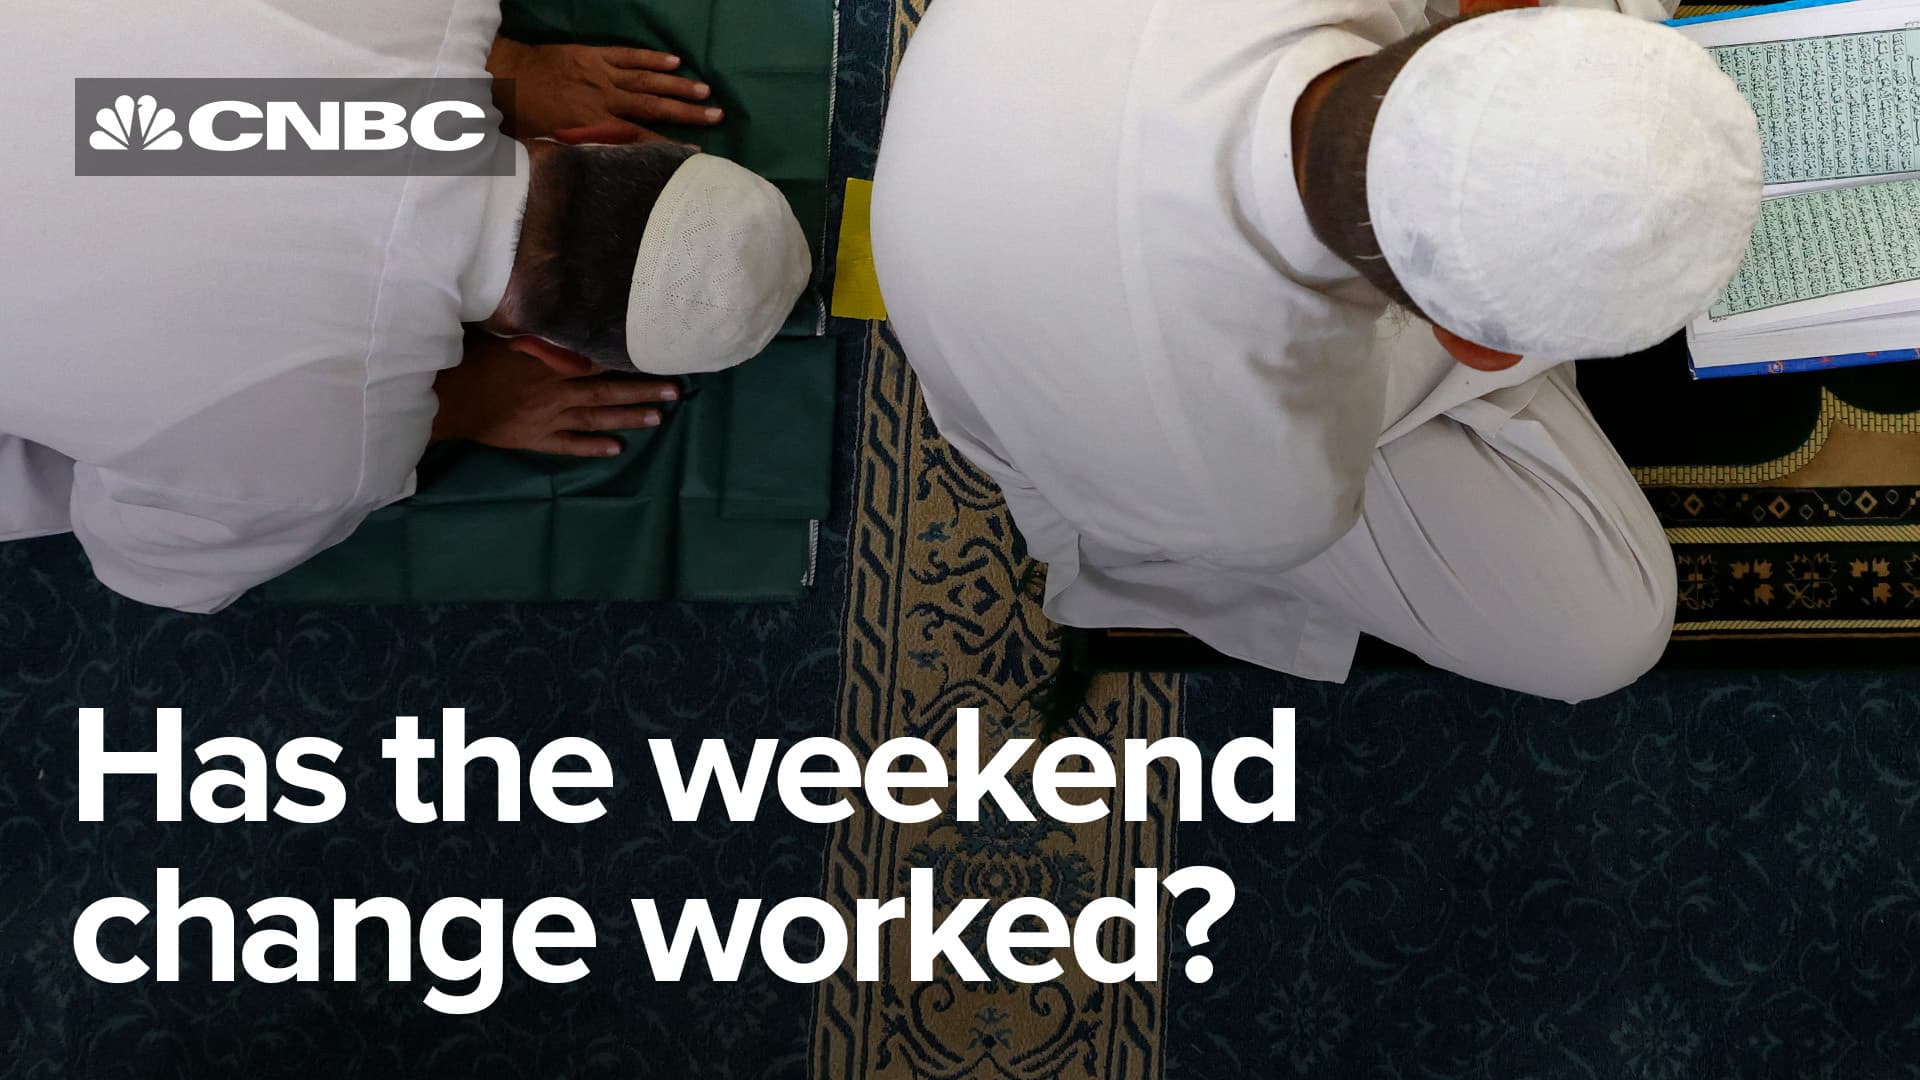 What happened after the UAE changed its work week